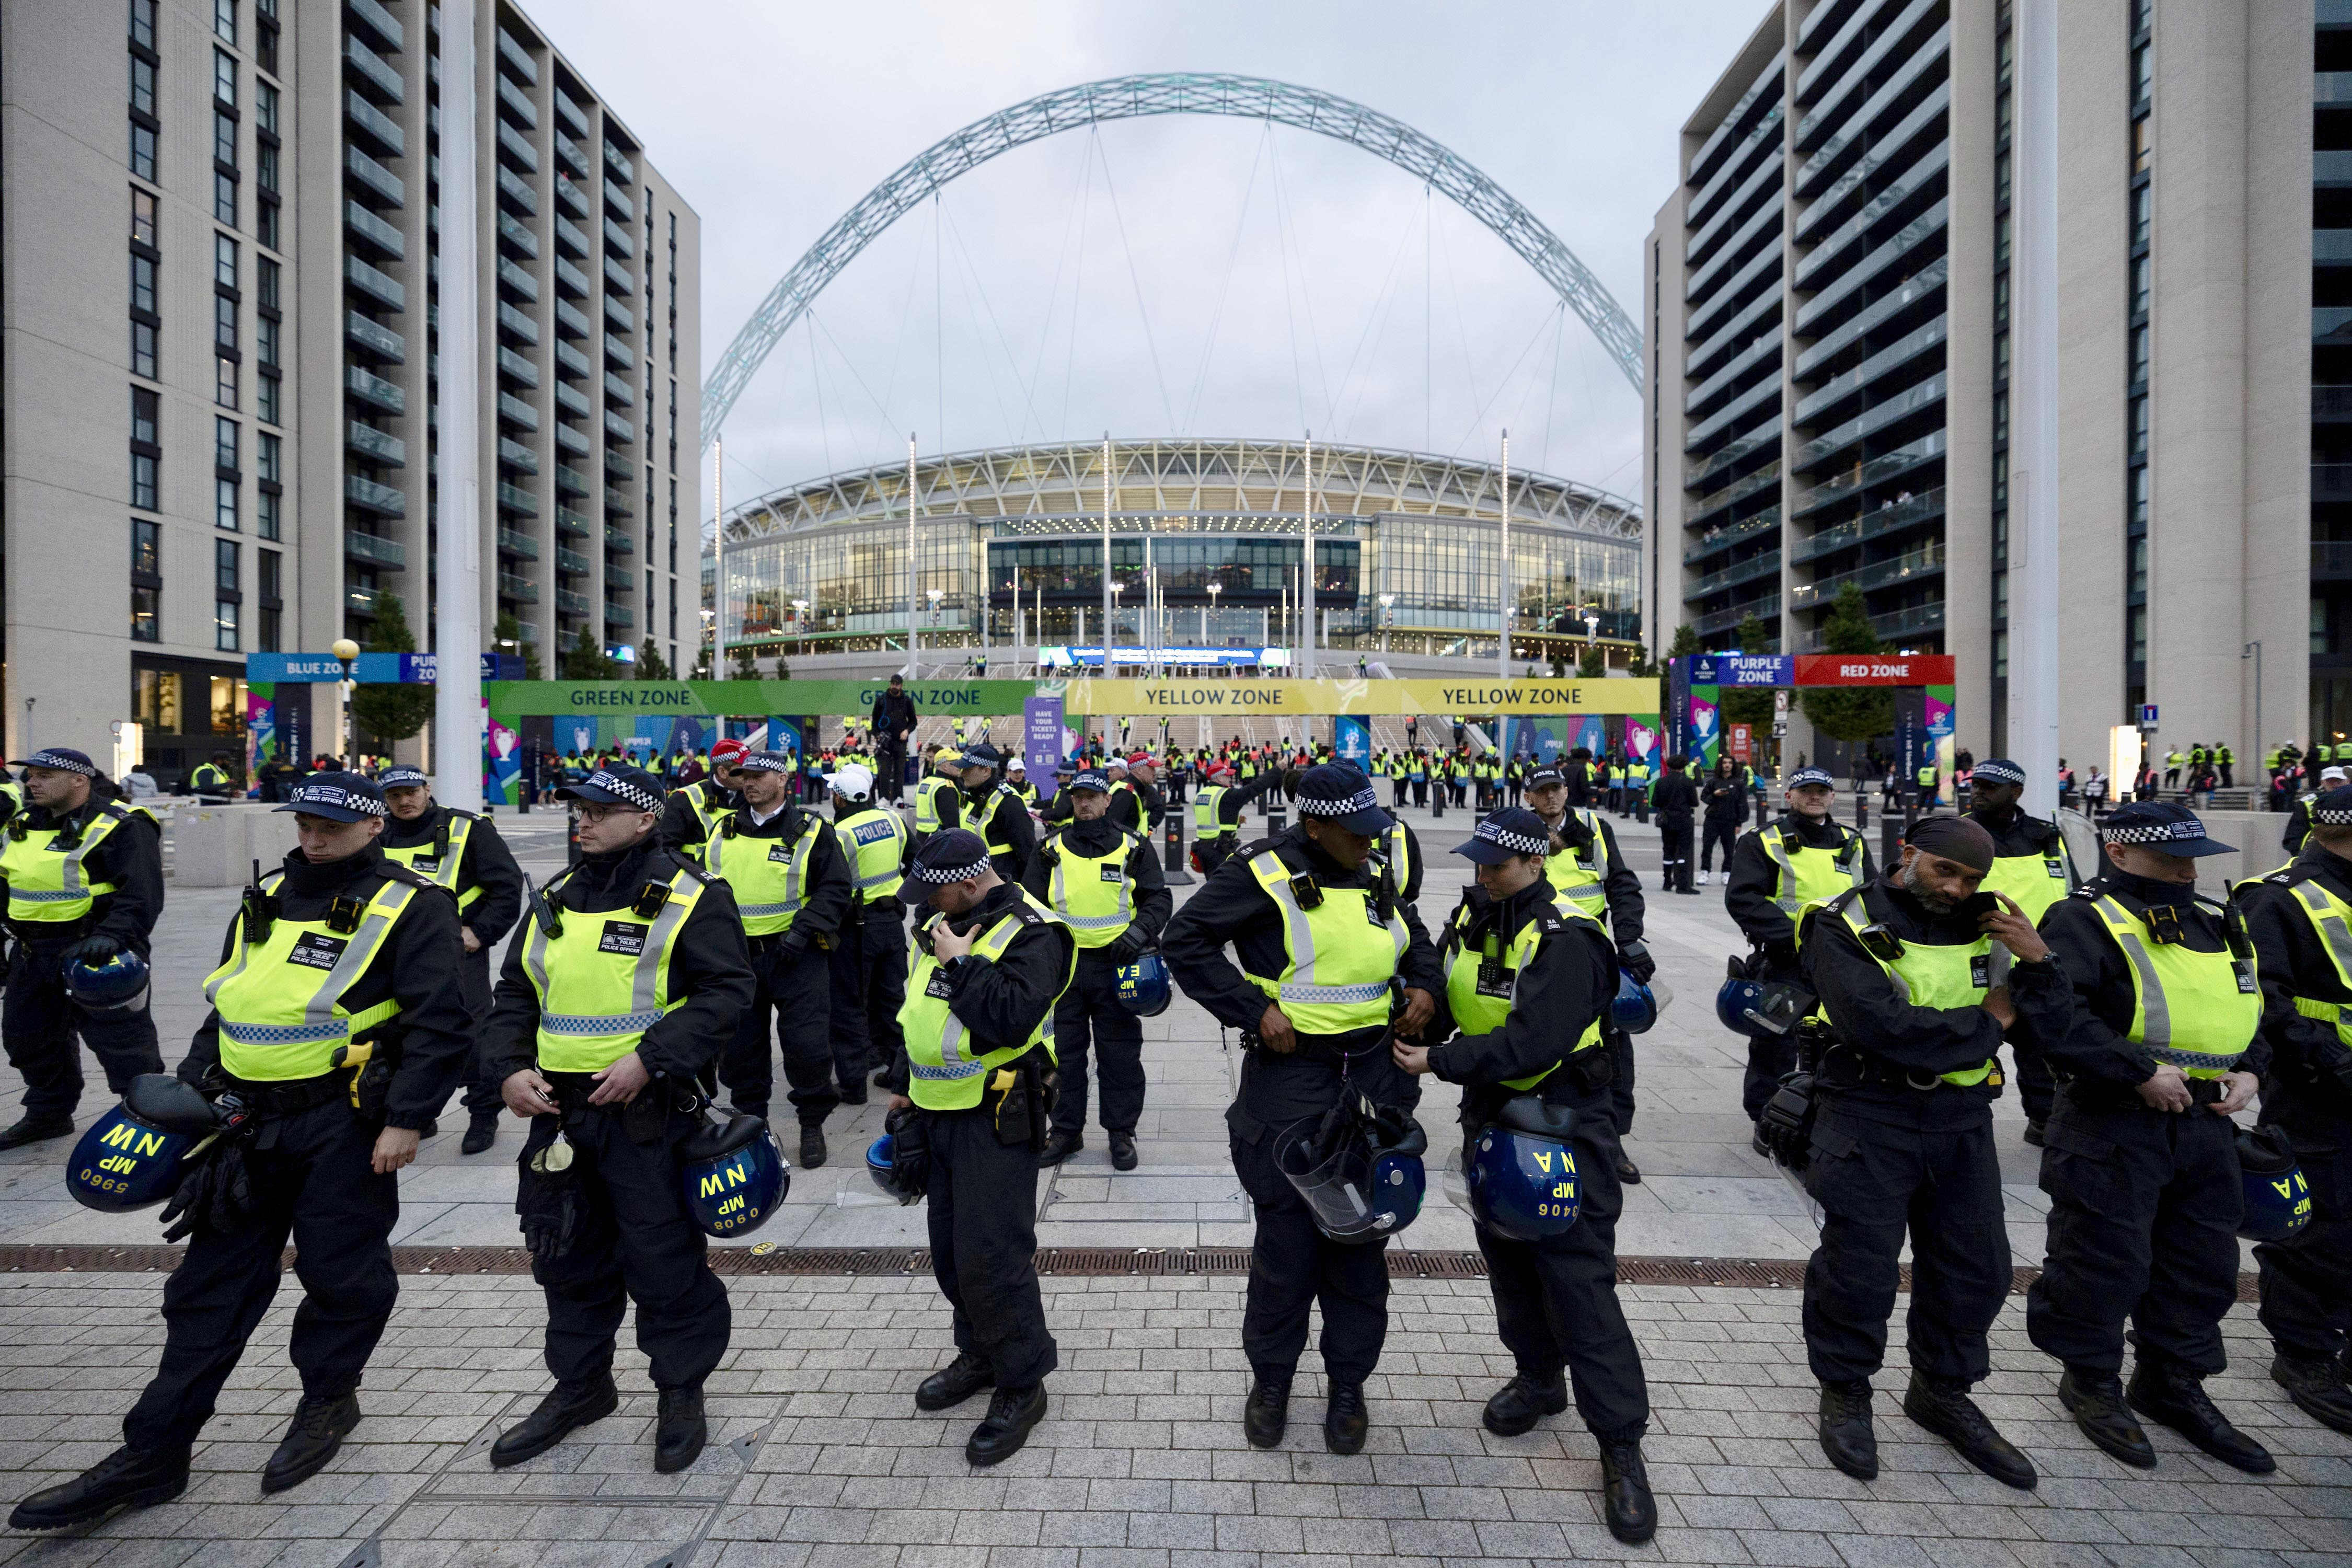 Cops were out in force at Wembley eiqrrieuiqrdinv